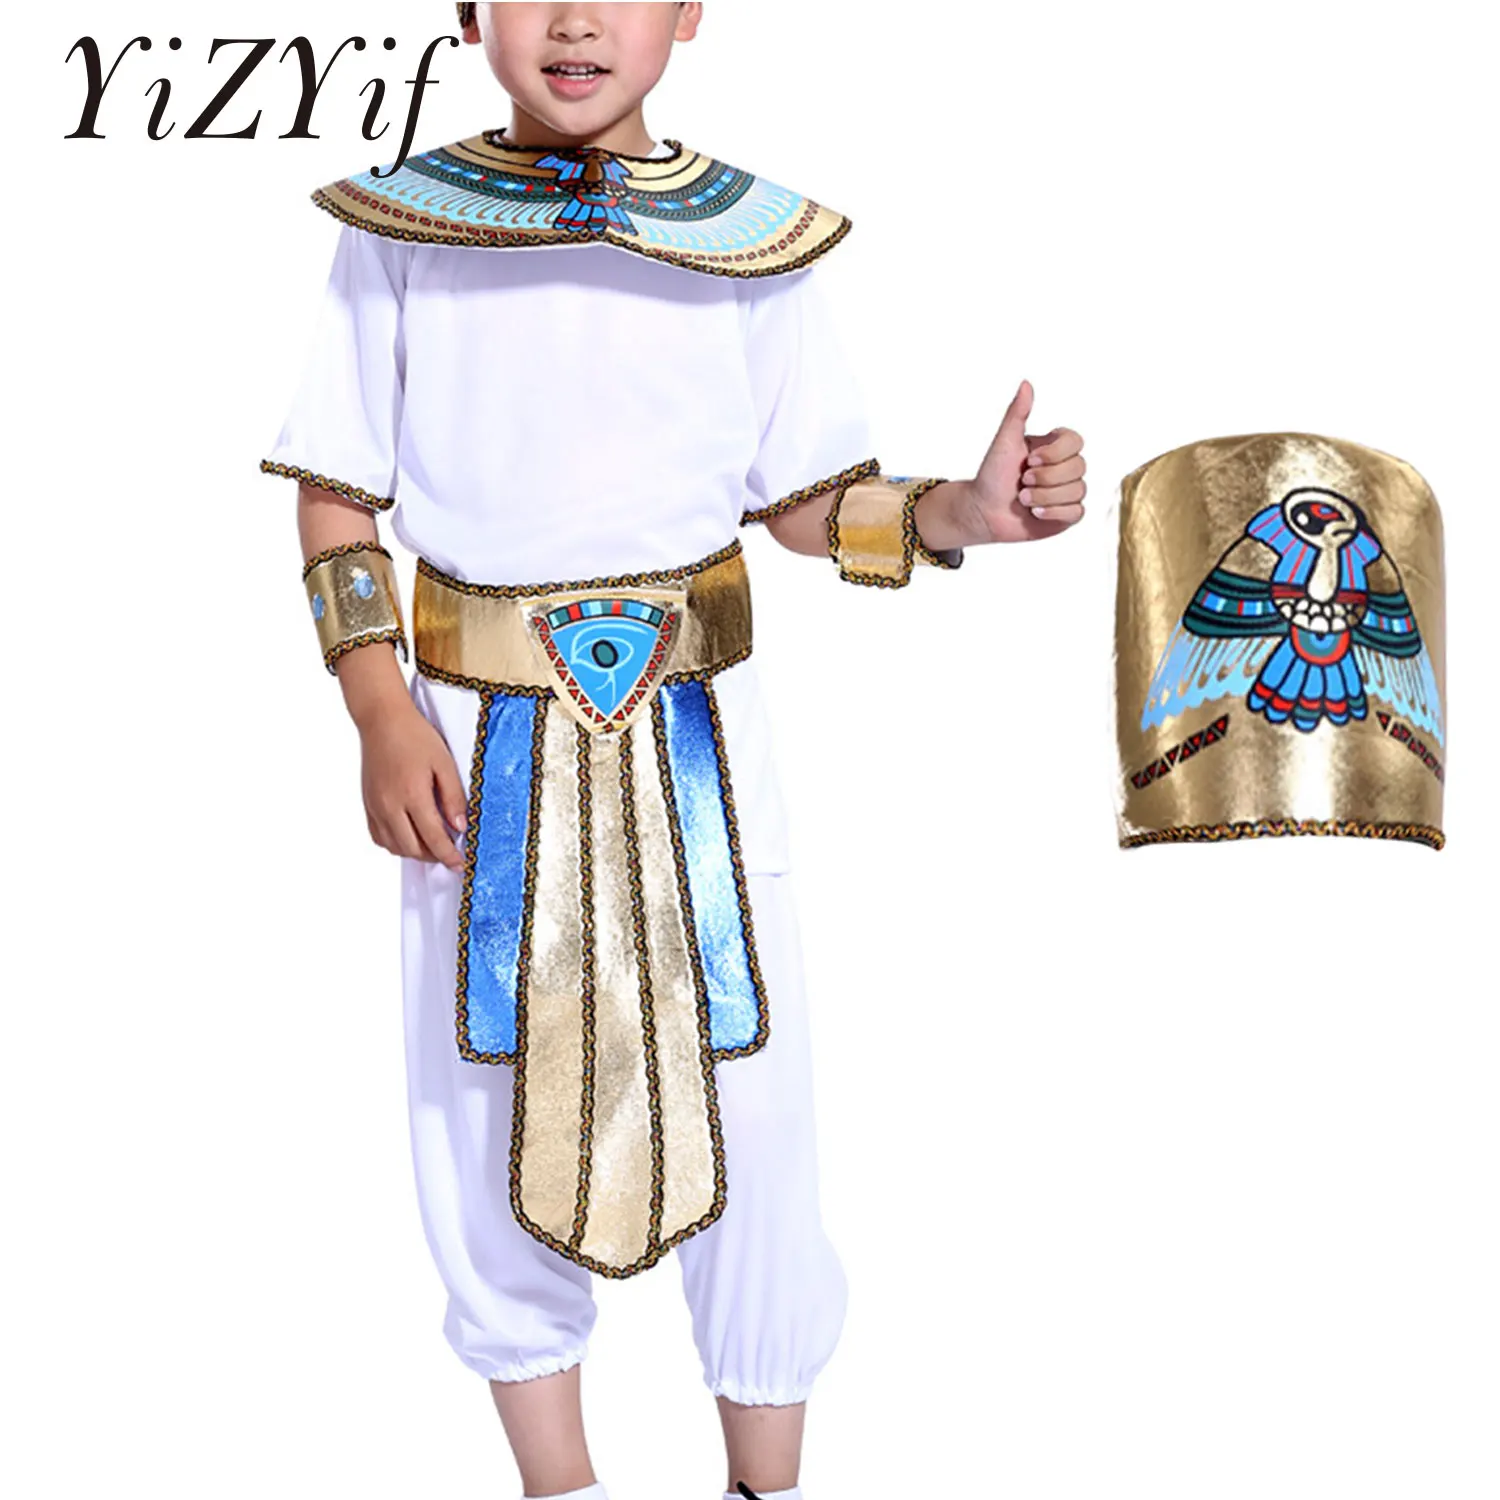 Kid Boy Egyptian Prince Costume Outfit Halloween Party Cosplay Classic Egypt Priest Pharaoh Cloth Ancient Rome Egyptian Dress Up